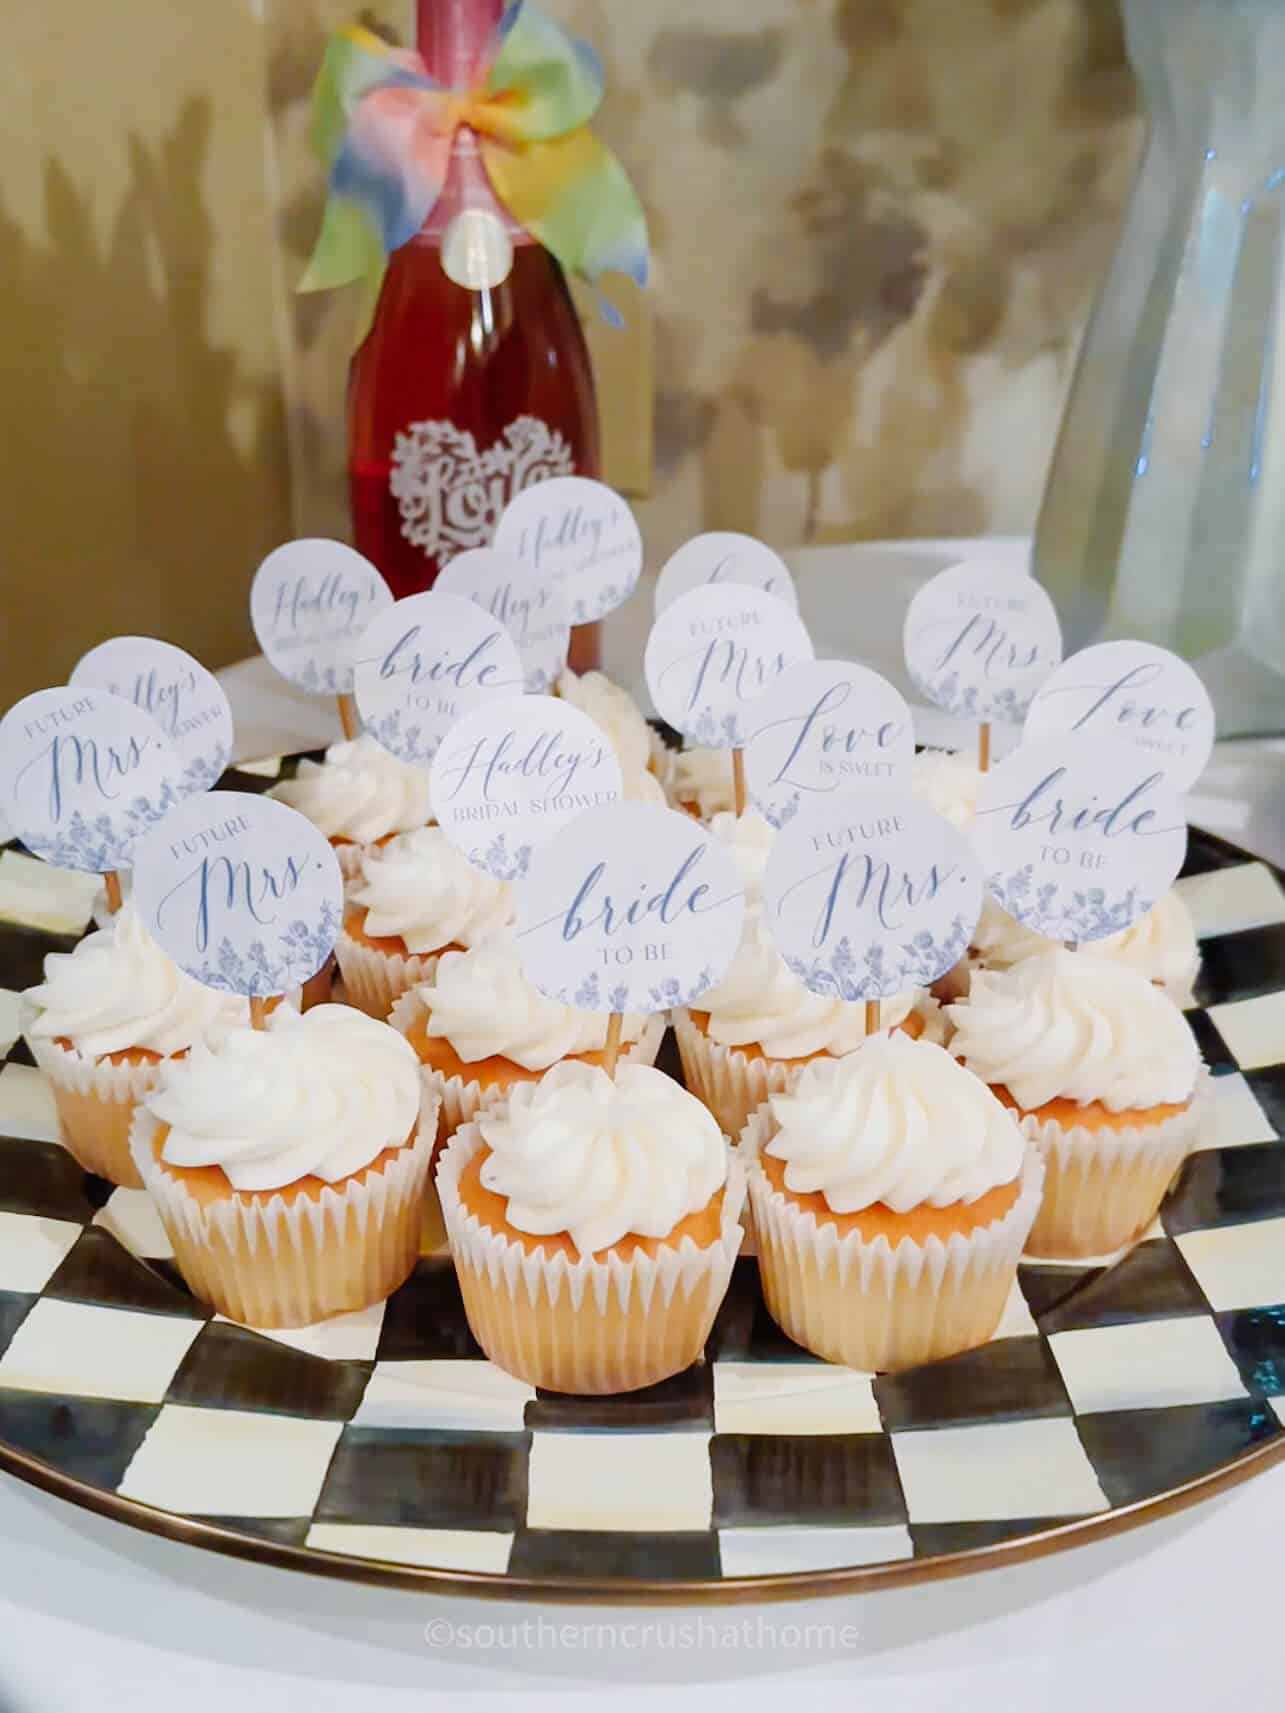 Cupcake Toppers on cupcakes